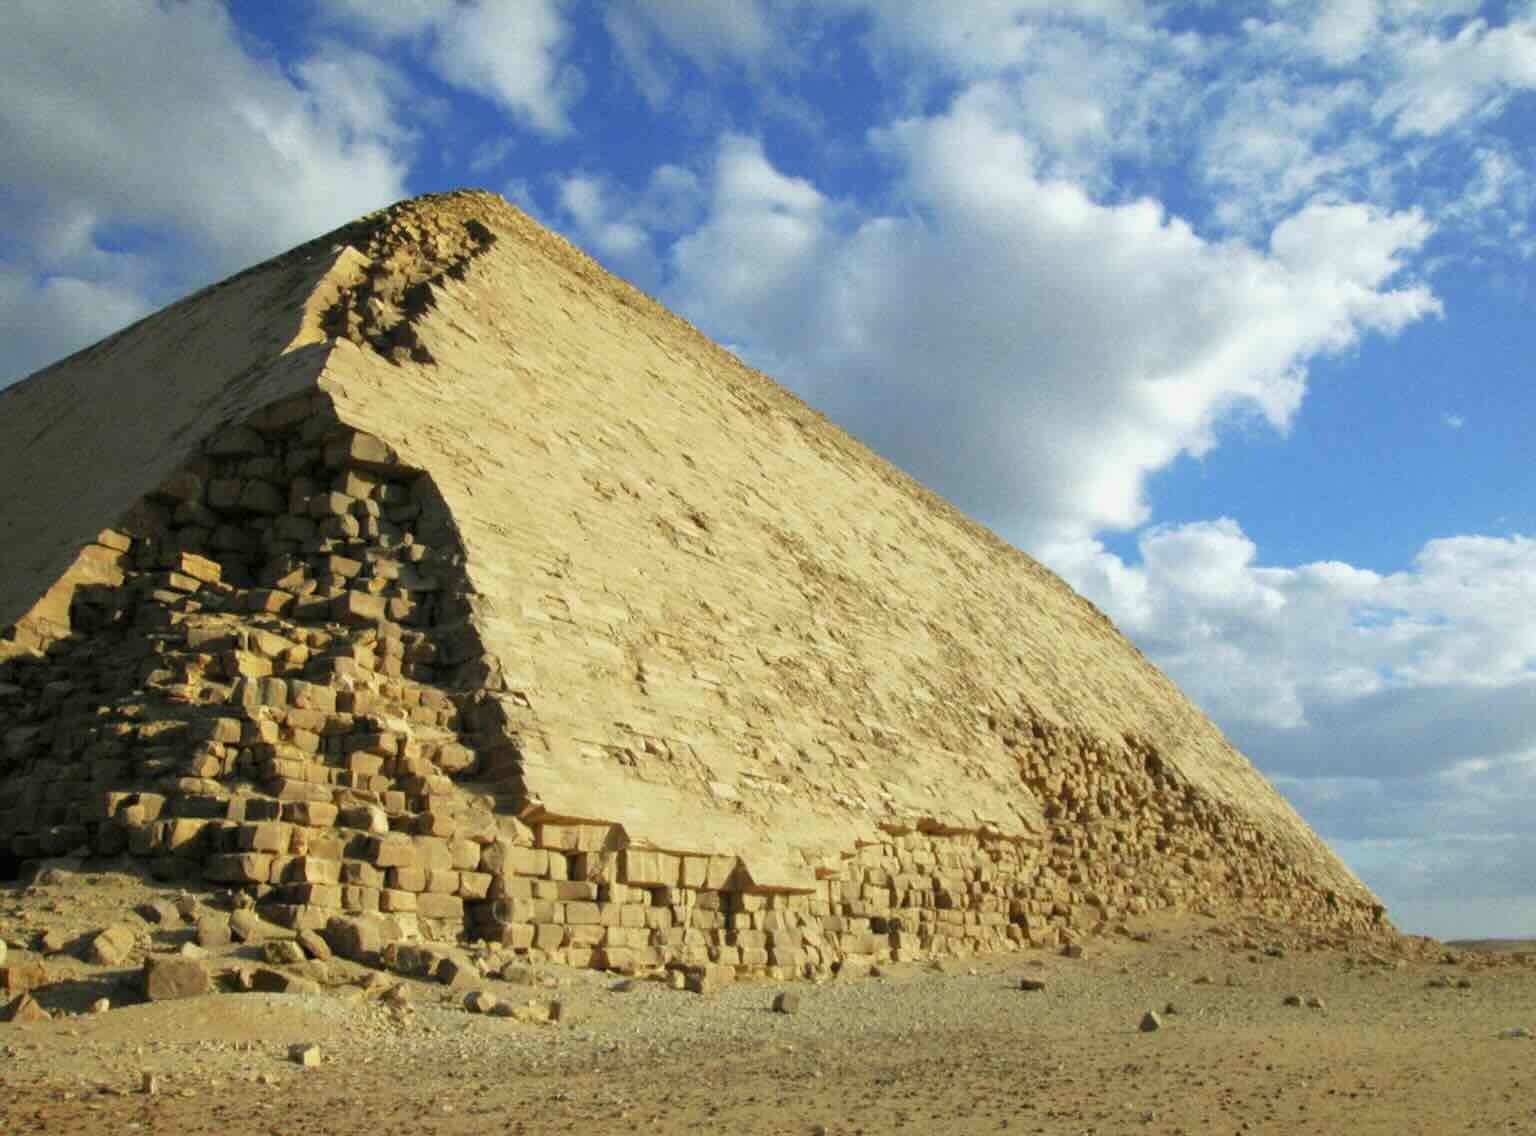 Why Was The Construction Of Pyramids Stopped?